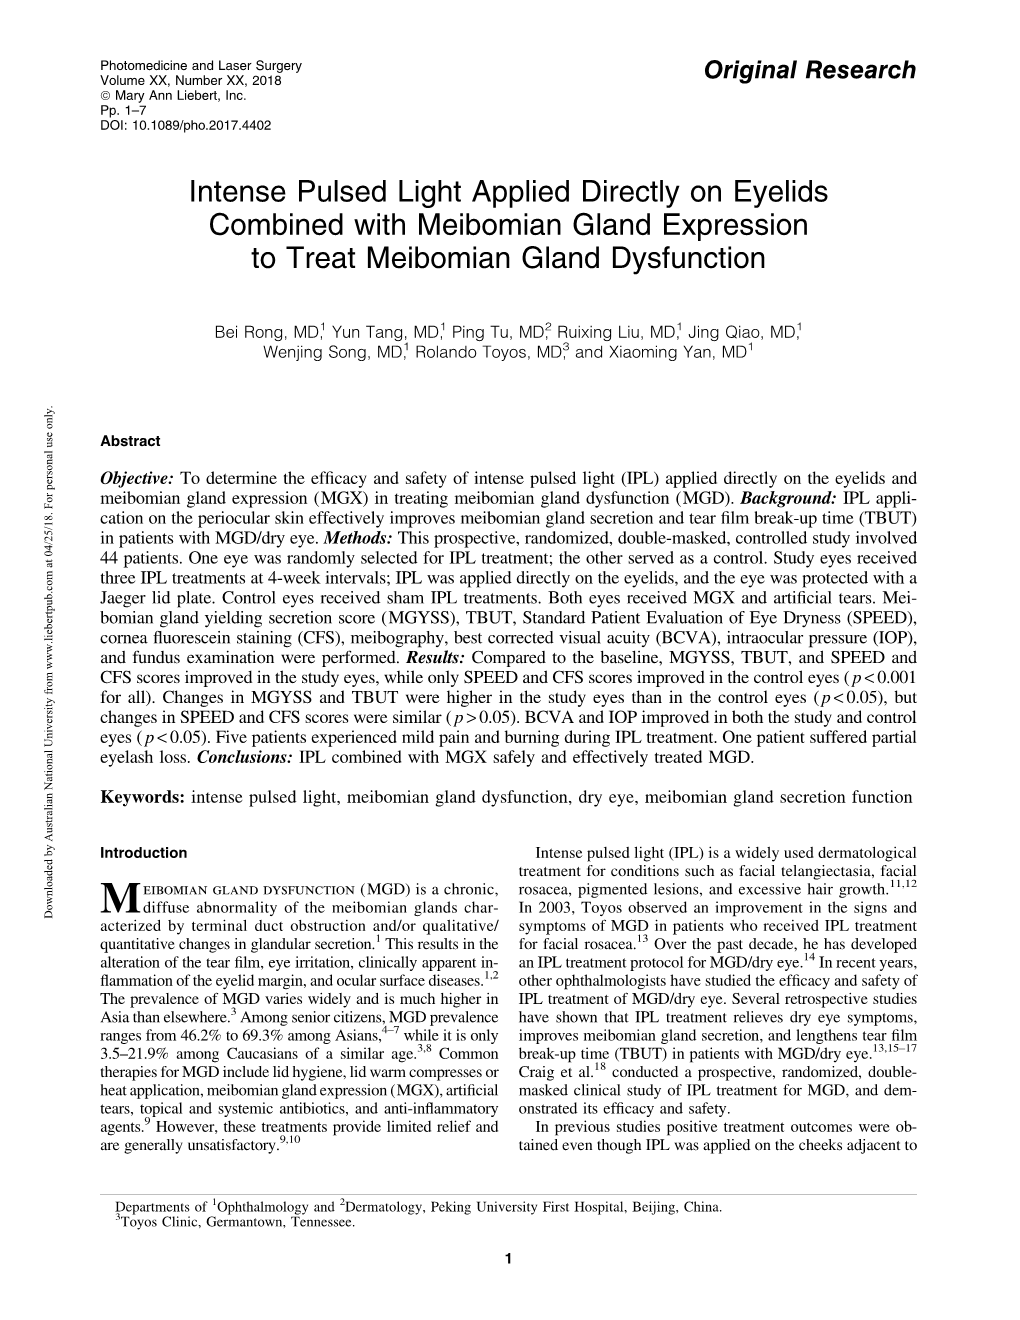 IPL Applied Directly on Eyelids Combined with MGX to Treat